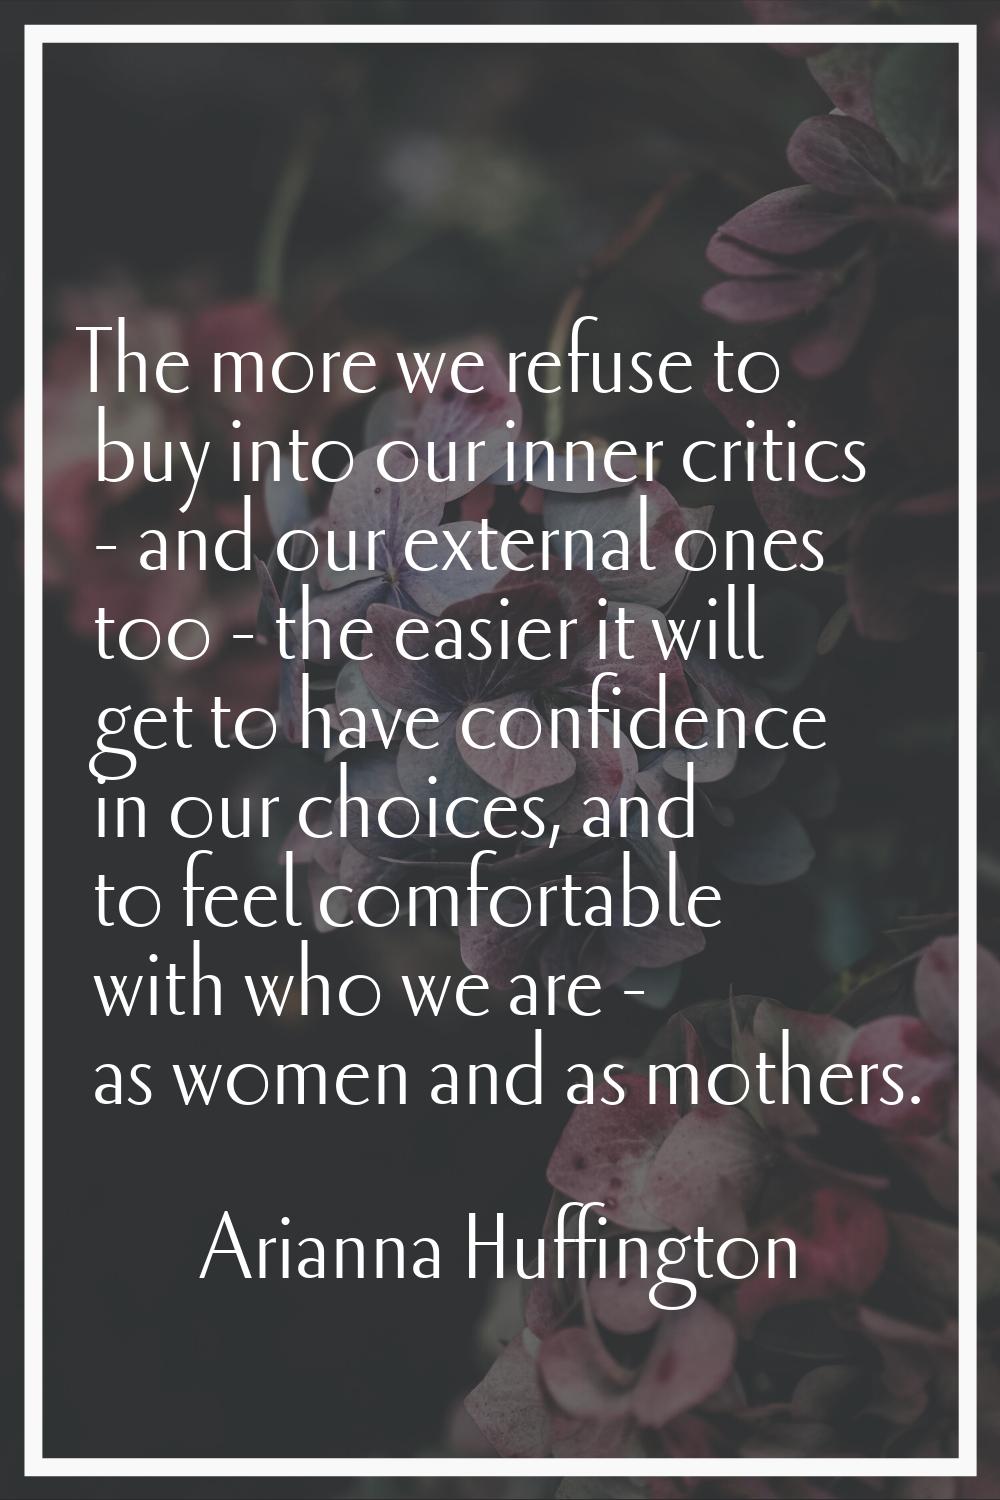 The more we refuse to buy into our inner critics - and our external ones too - the easier it will g